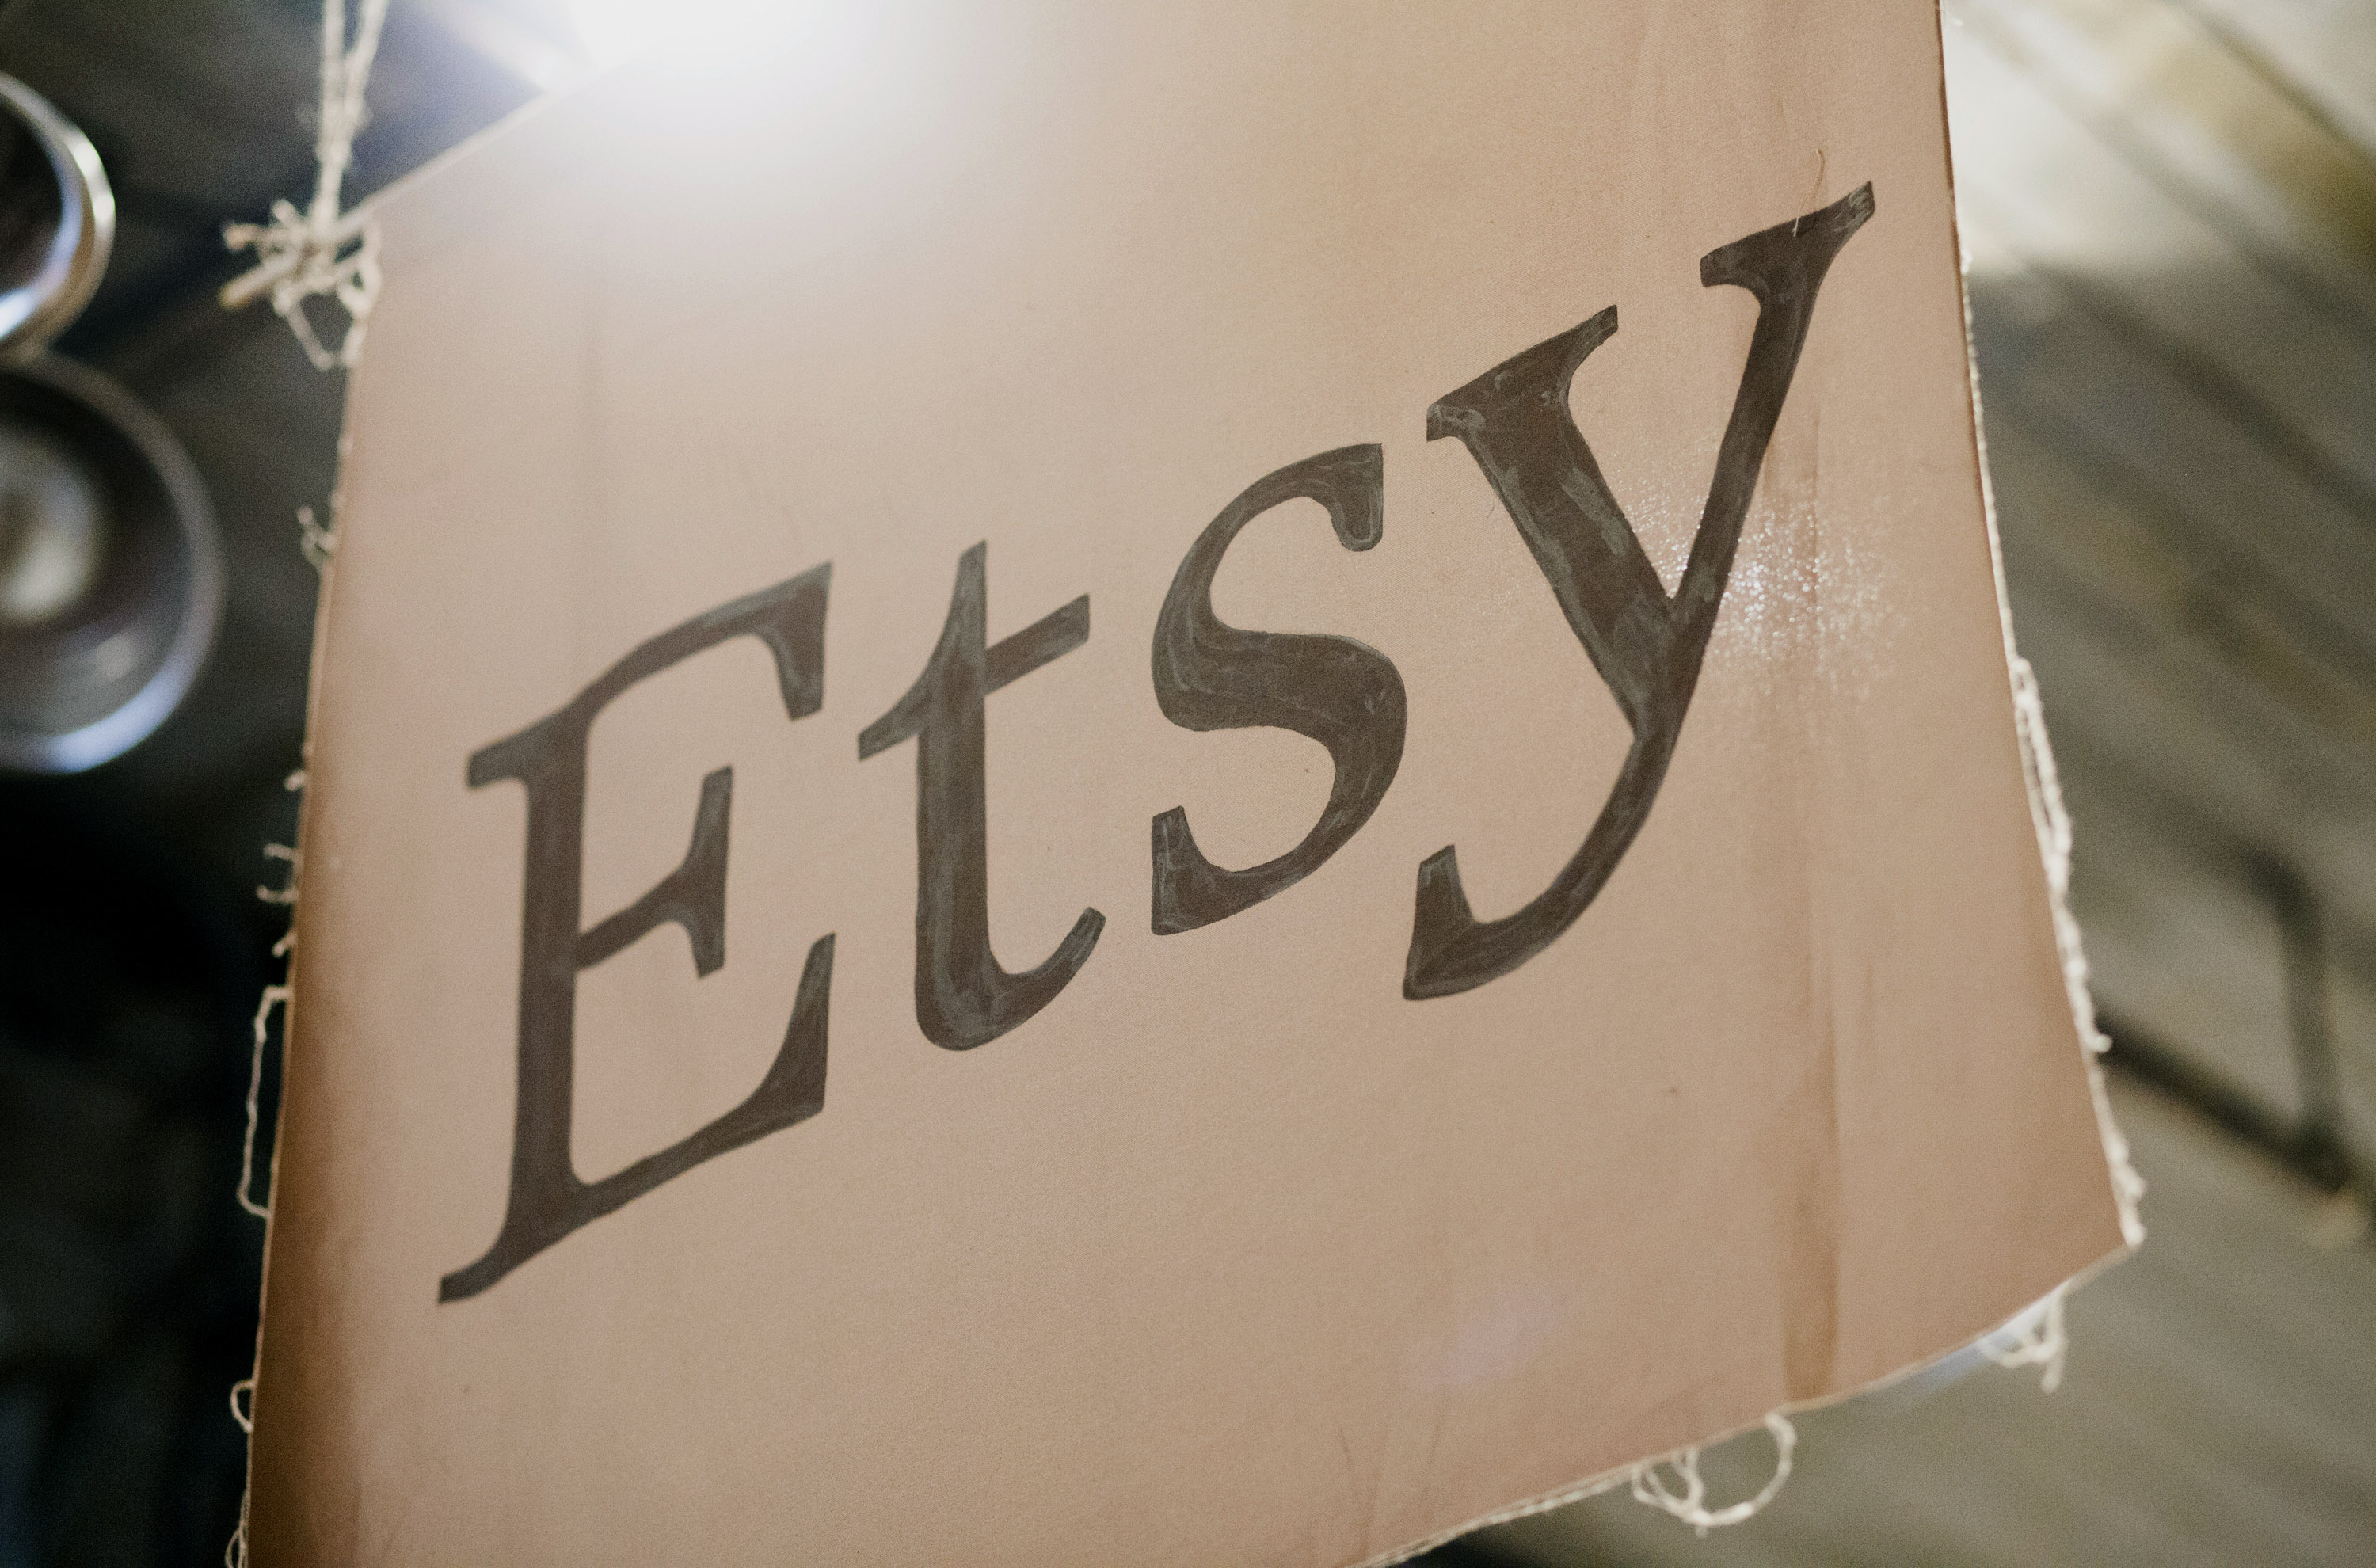 Etsy signage at the Brooklyn Beta conference in Brooklyn, N.Y. on Oct. 12, 2012.